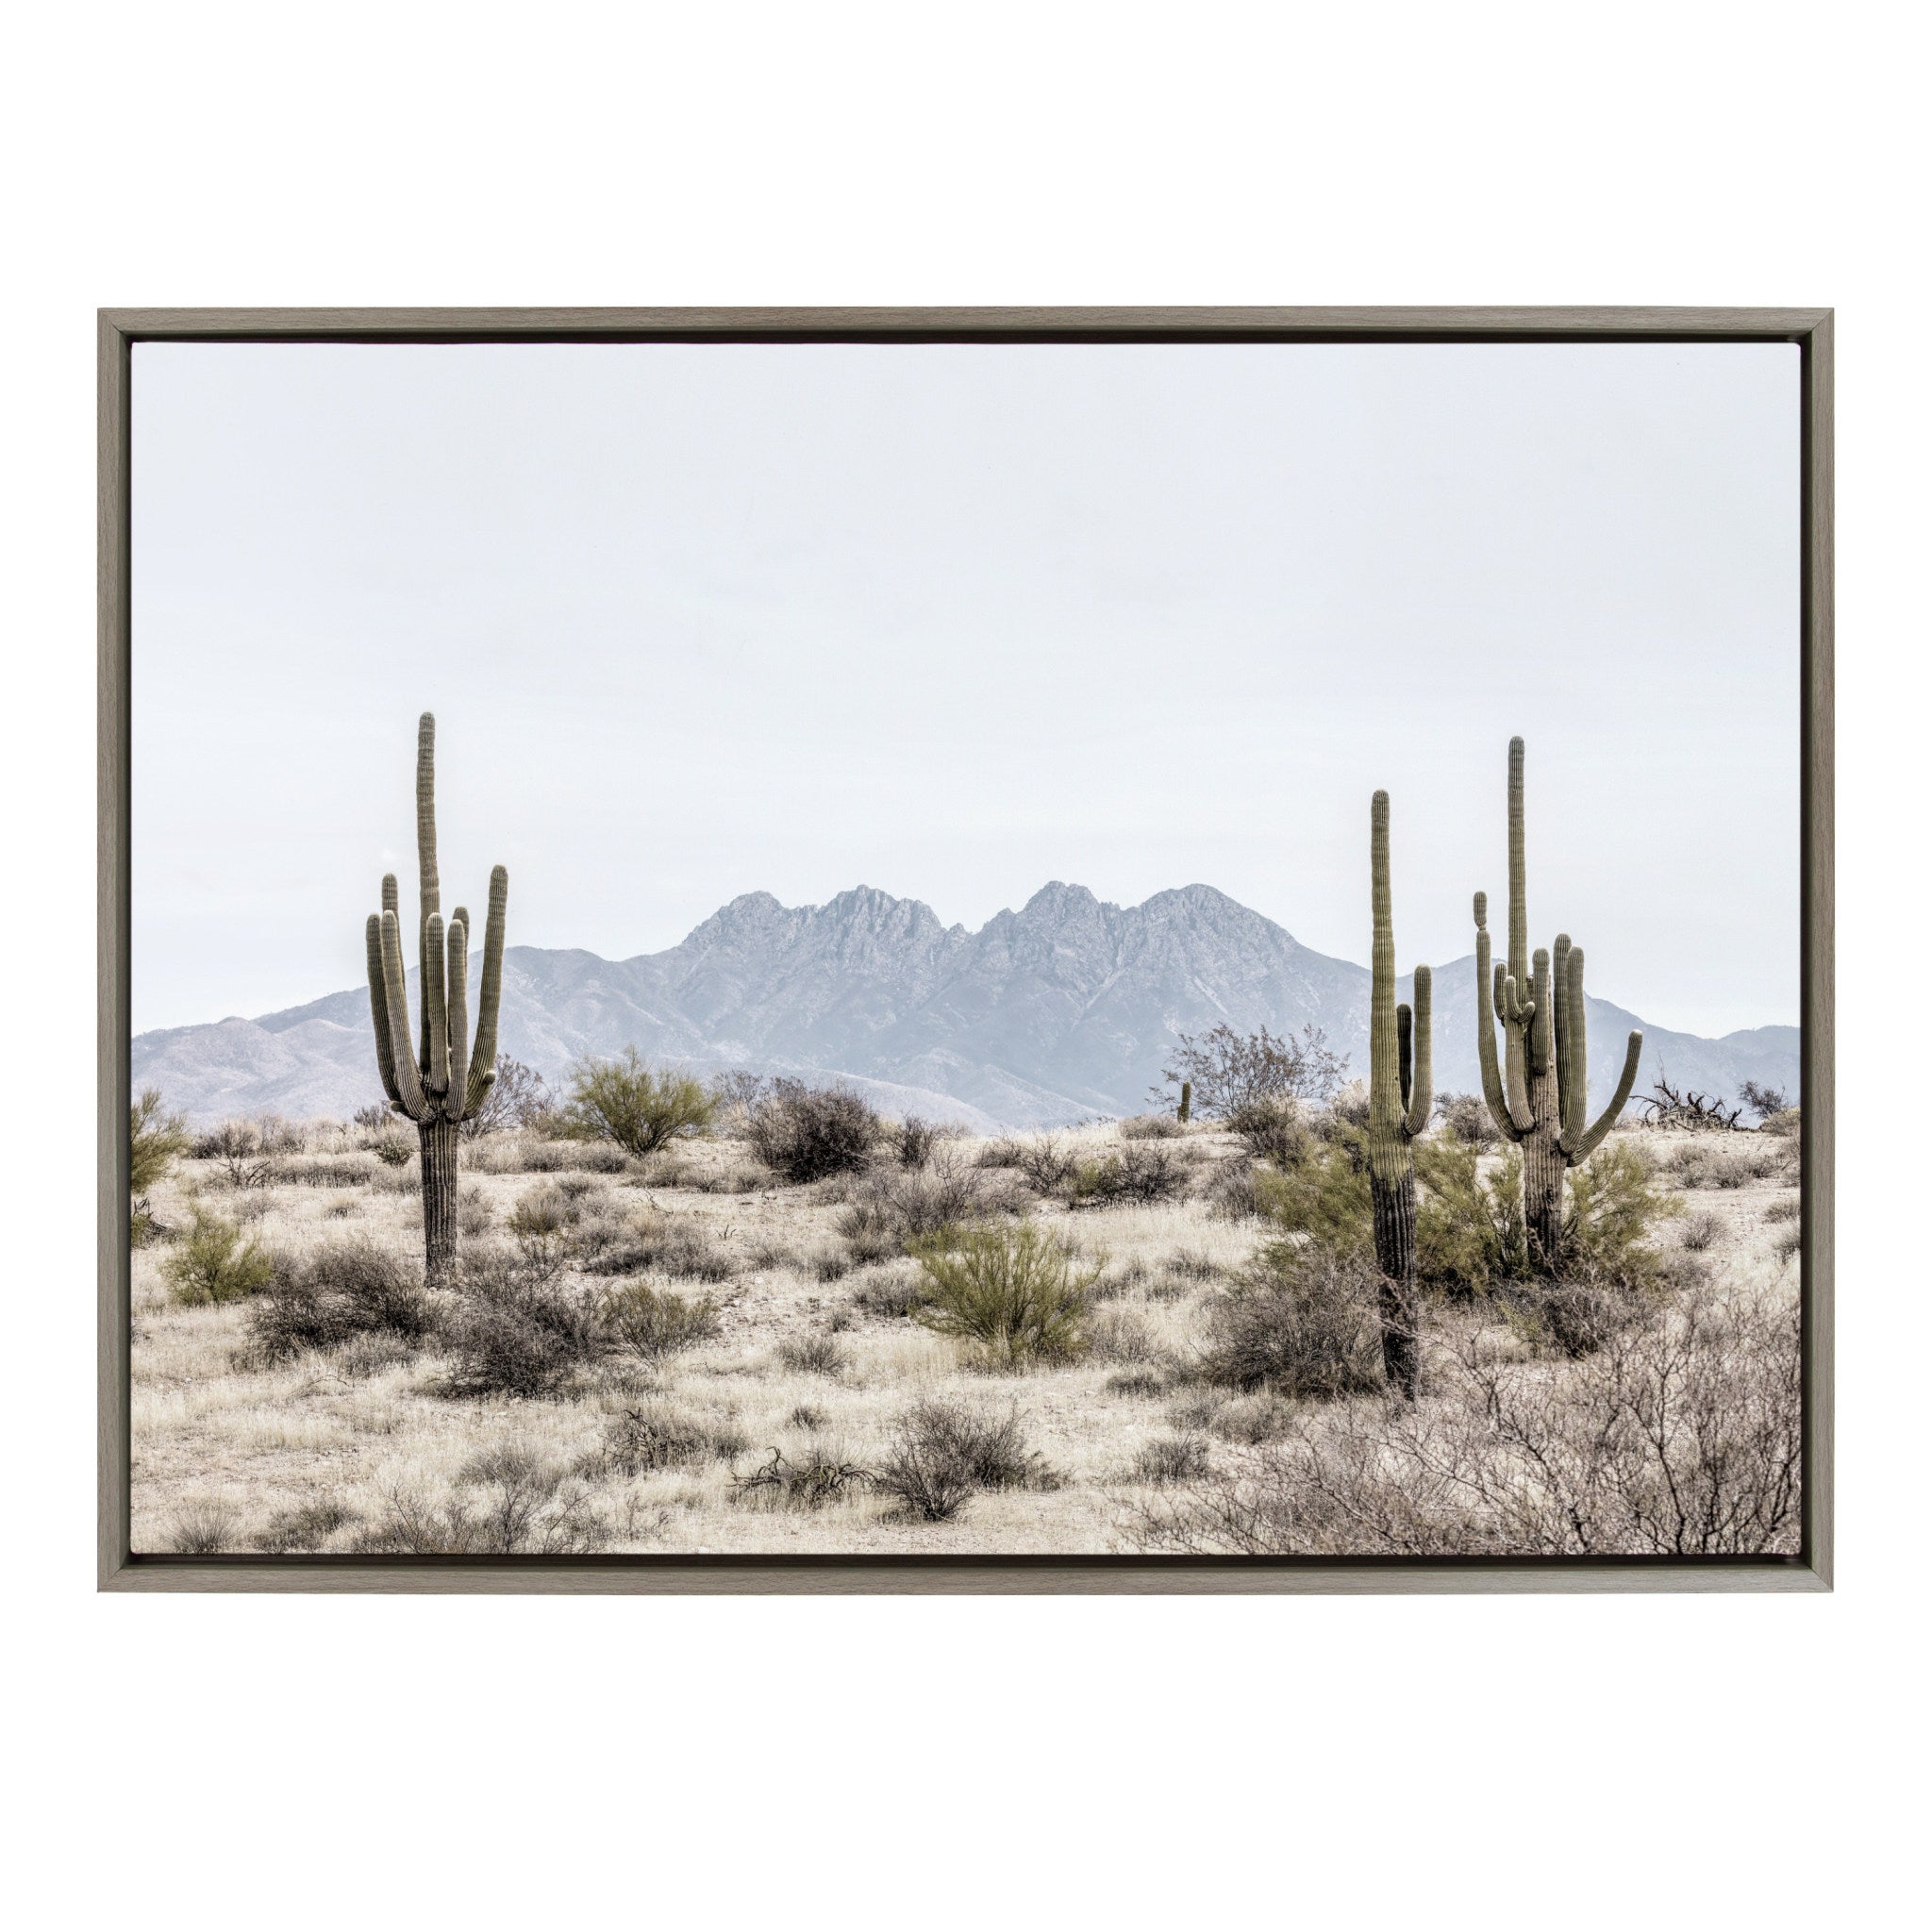 Kate and Laurel Sylvie Sunrise Cactus, Pink Cactus Flower and Cactus 25  Framed Canvas Wall Art Set by Amy Peterson Art Studio, 3 Piece Set 16x20  and